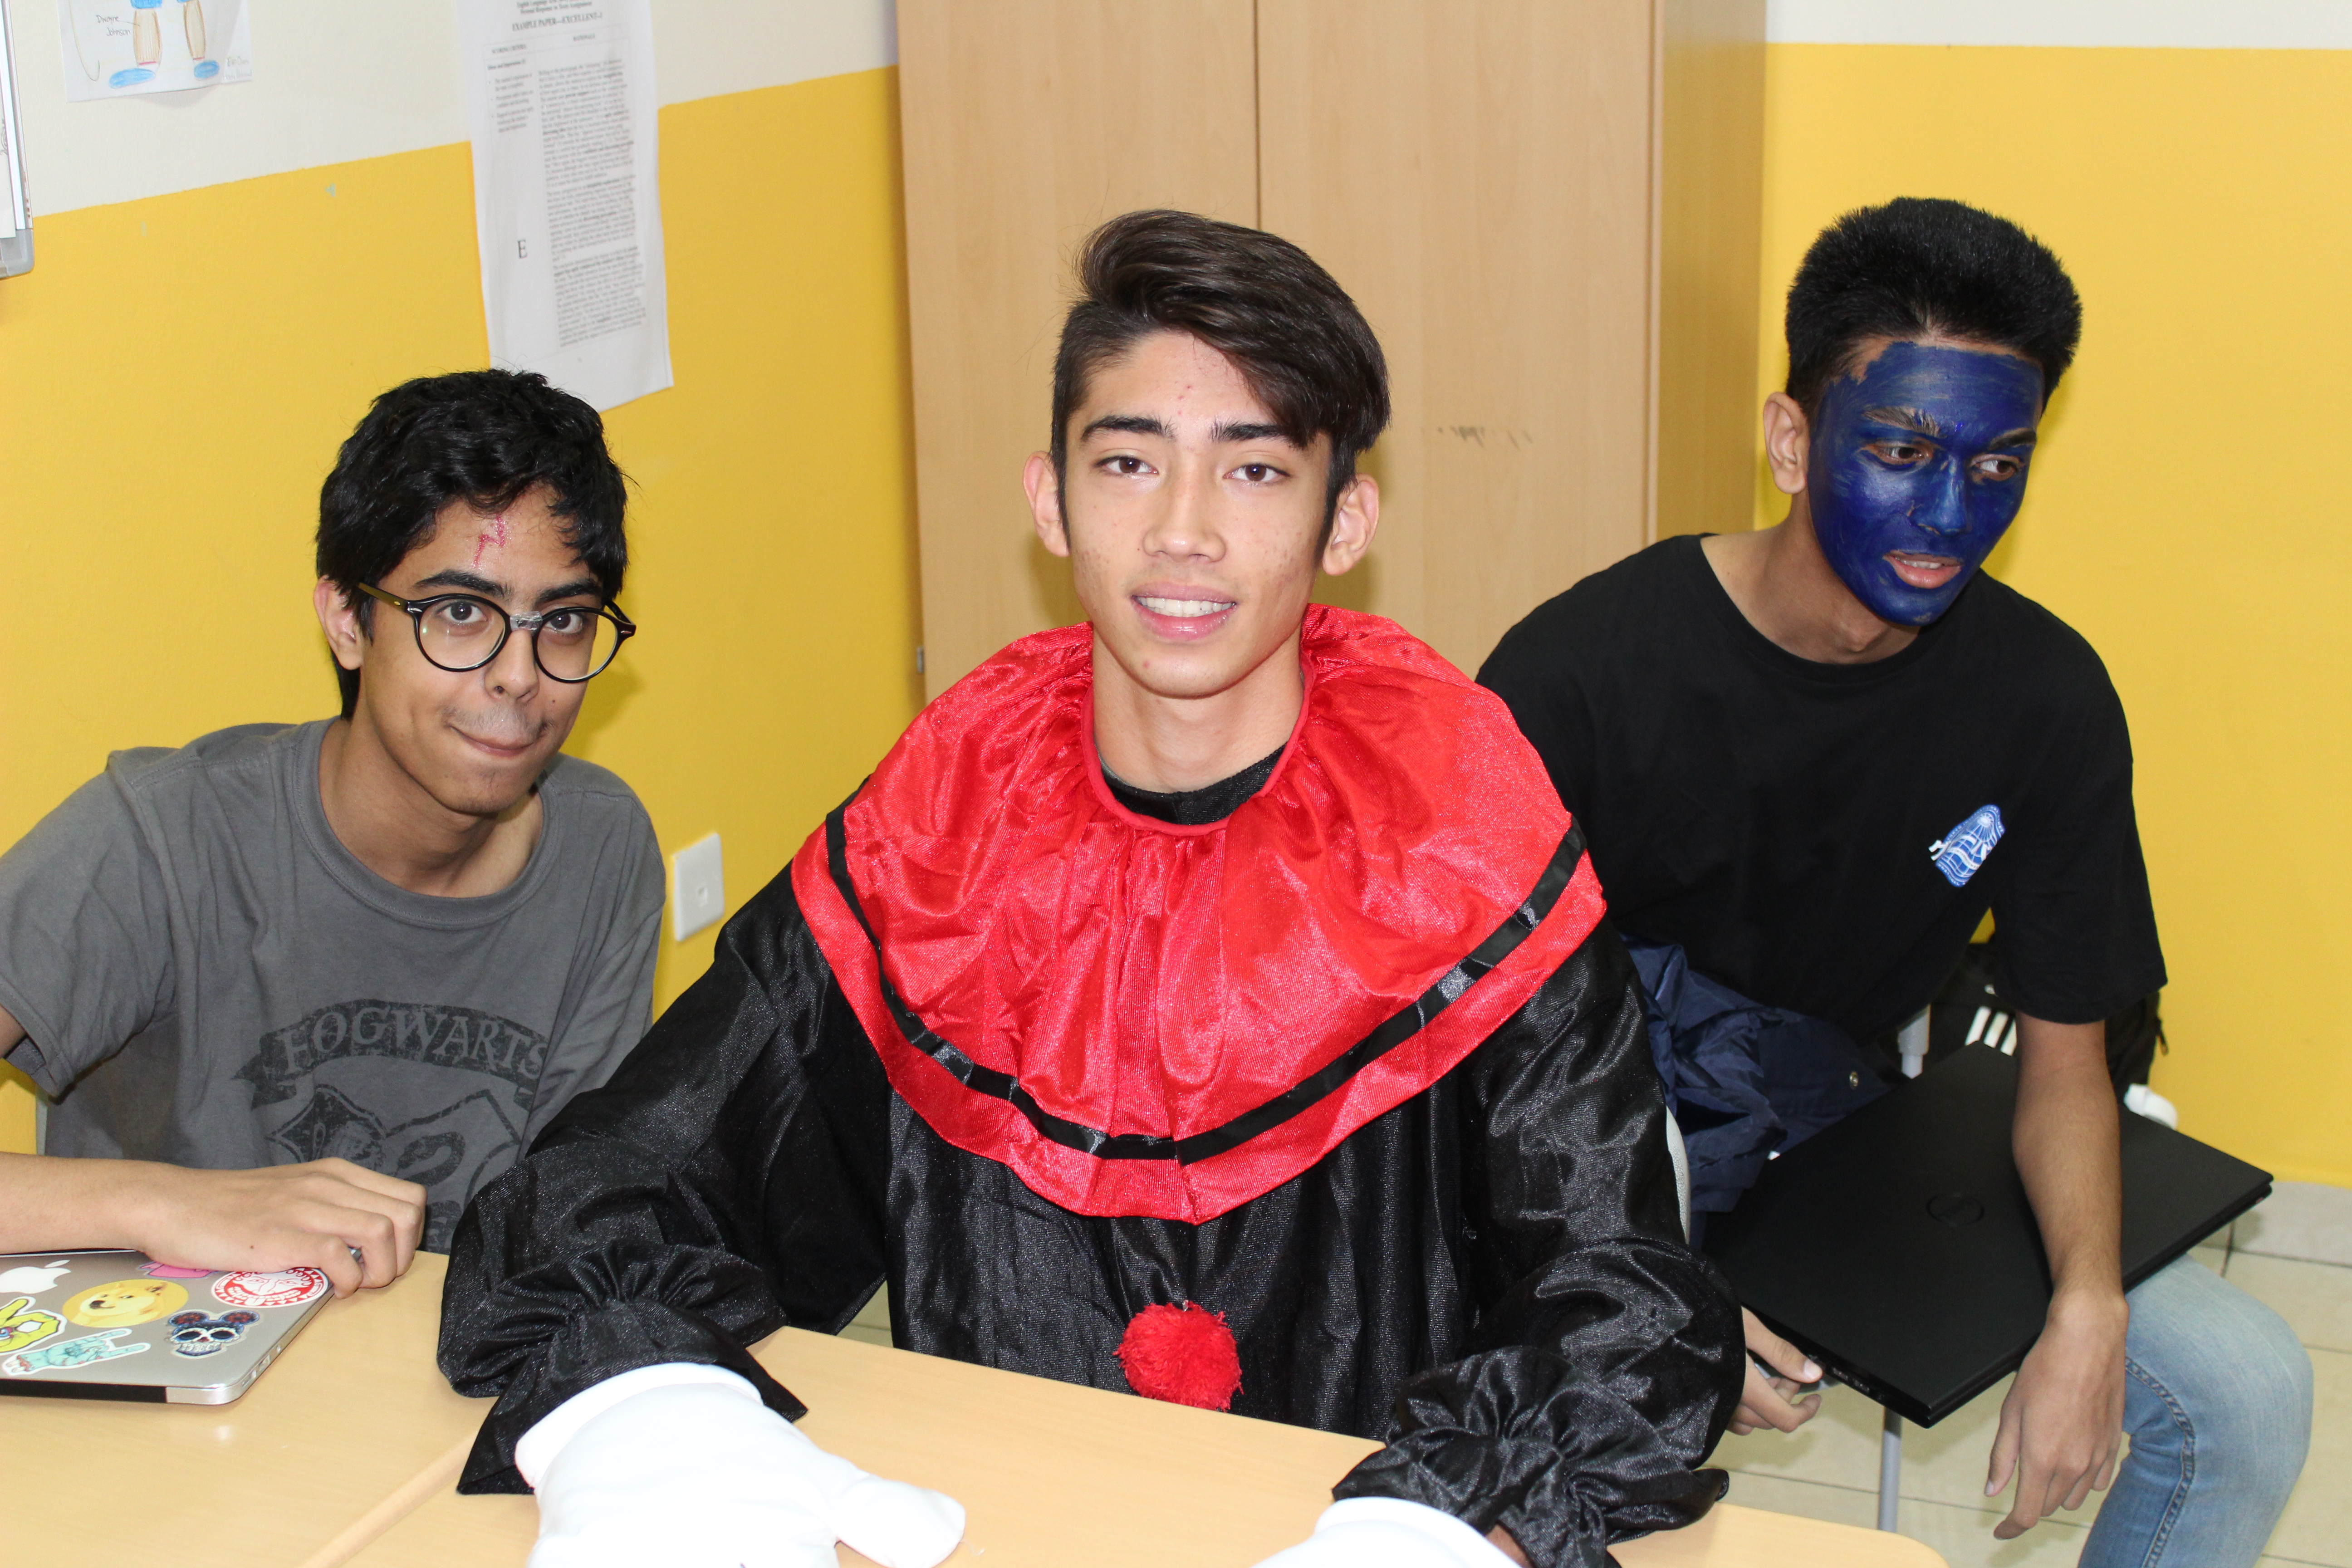 Students dressed up as fictional characters